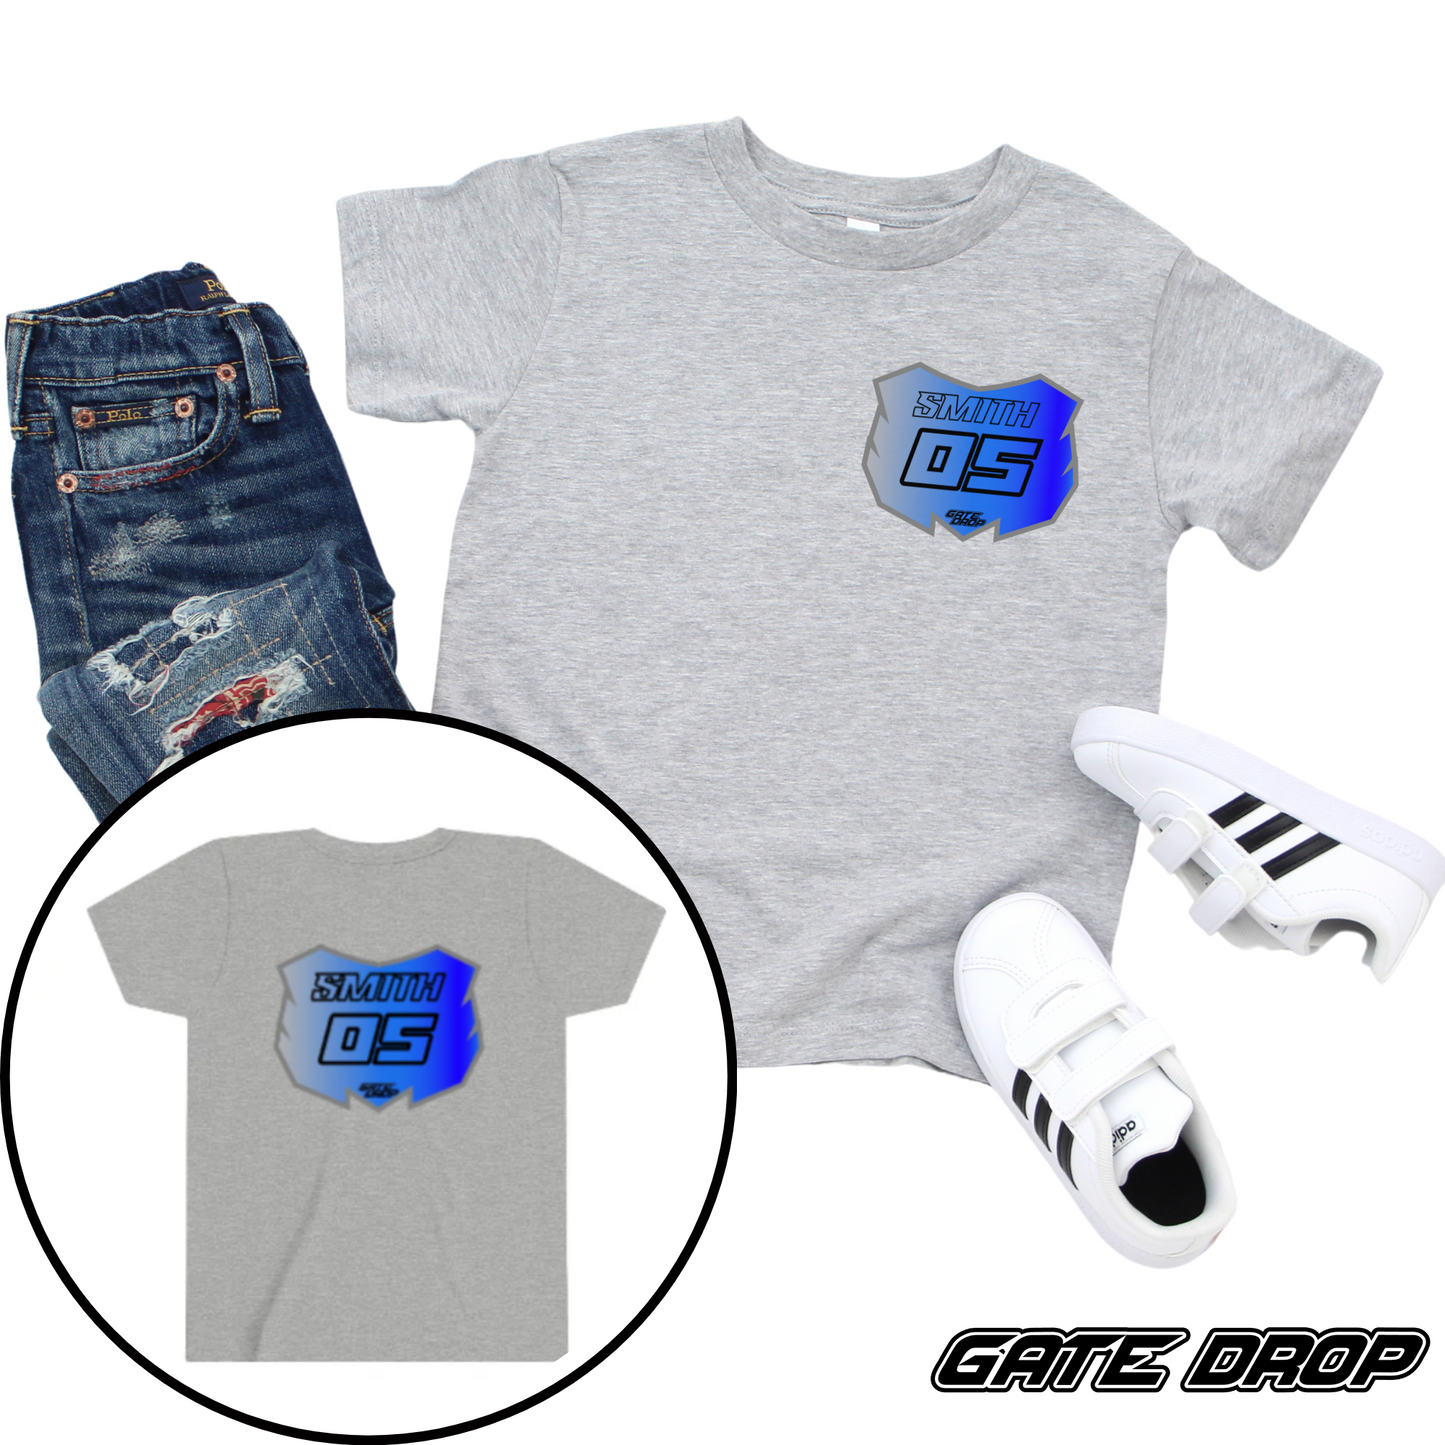 Gate Drop Motocross Gradient Plate with Custom Name and Number Youth Tee Shirt